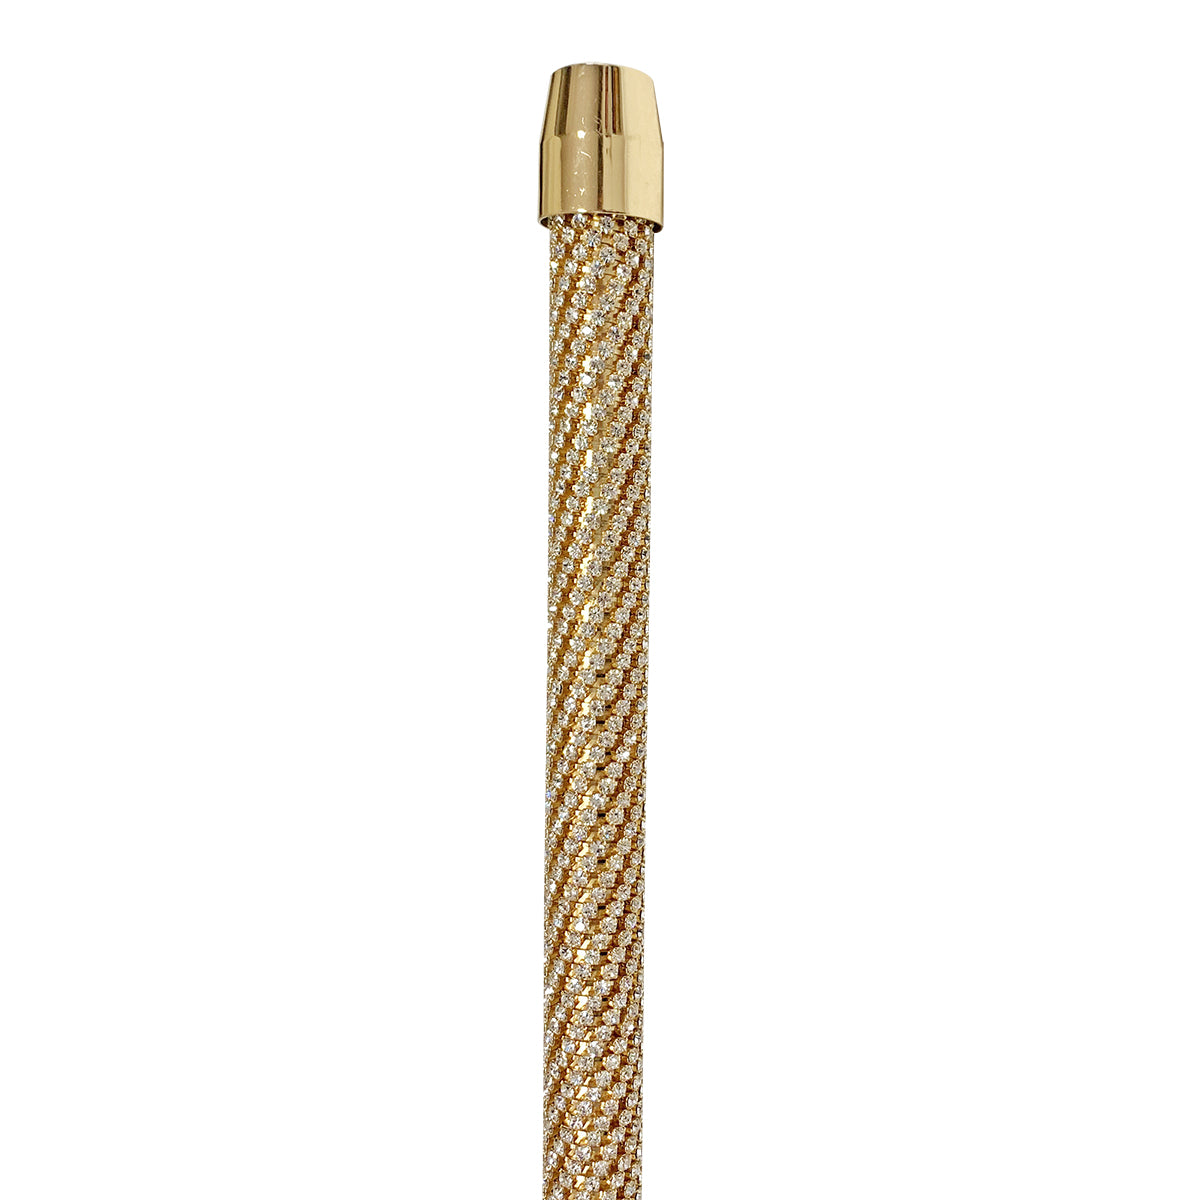 Luxury Gold plated 24K walking stick encrusted with thousands of crystals